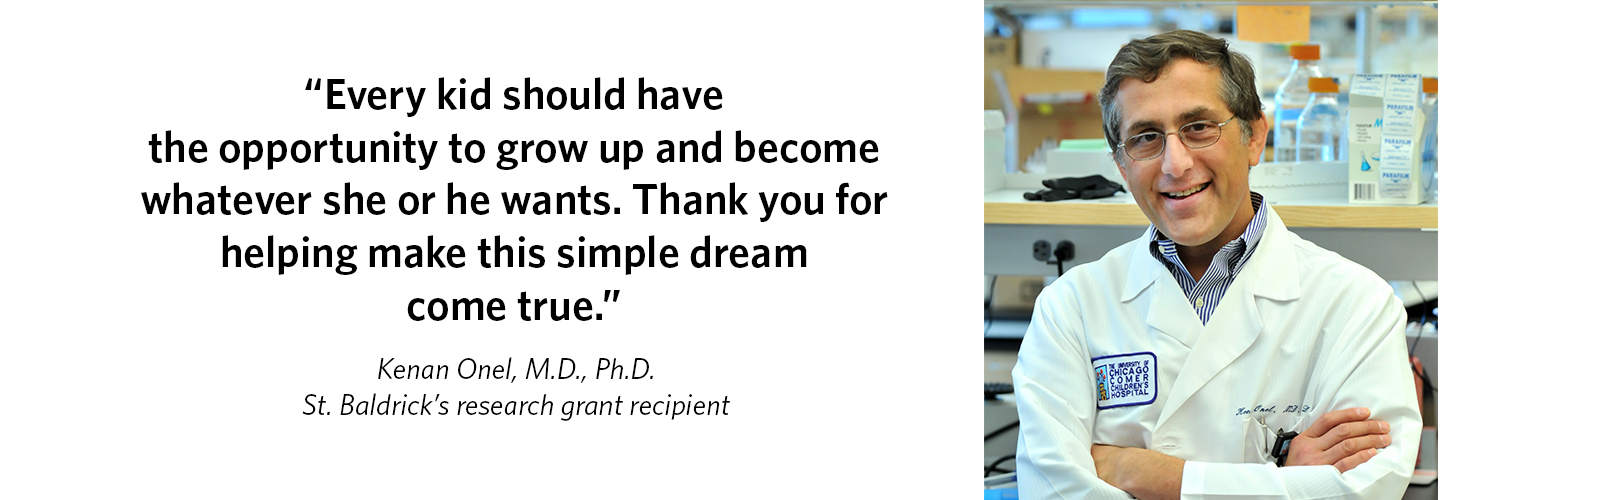 'Every kid should have the opportunity to grow up and become whatever she or he wants. Thank you for helping make this simple dream come true.' Kenan Onel, M.D., Ph.D., St. Baldrick's research grant recipient